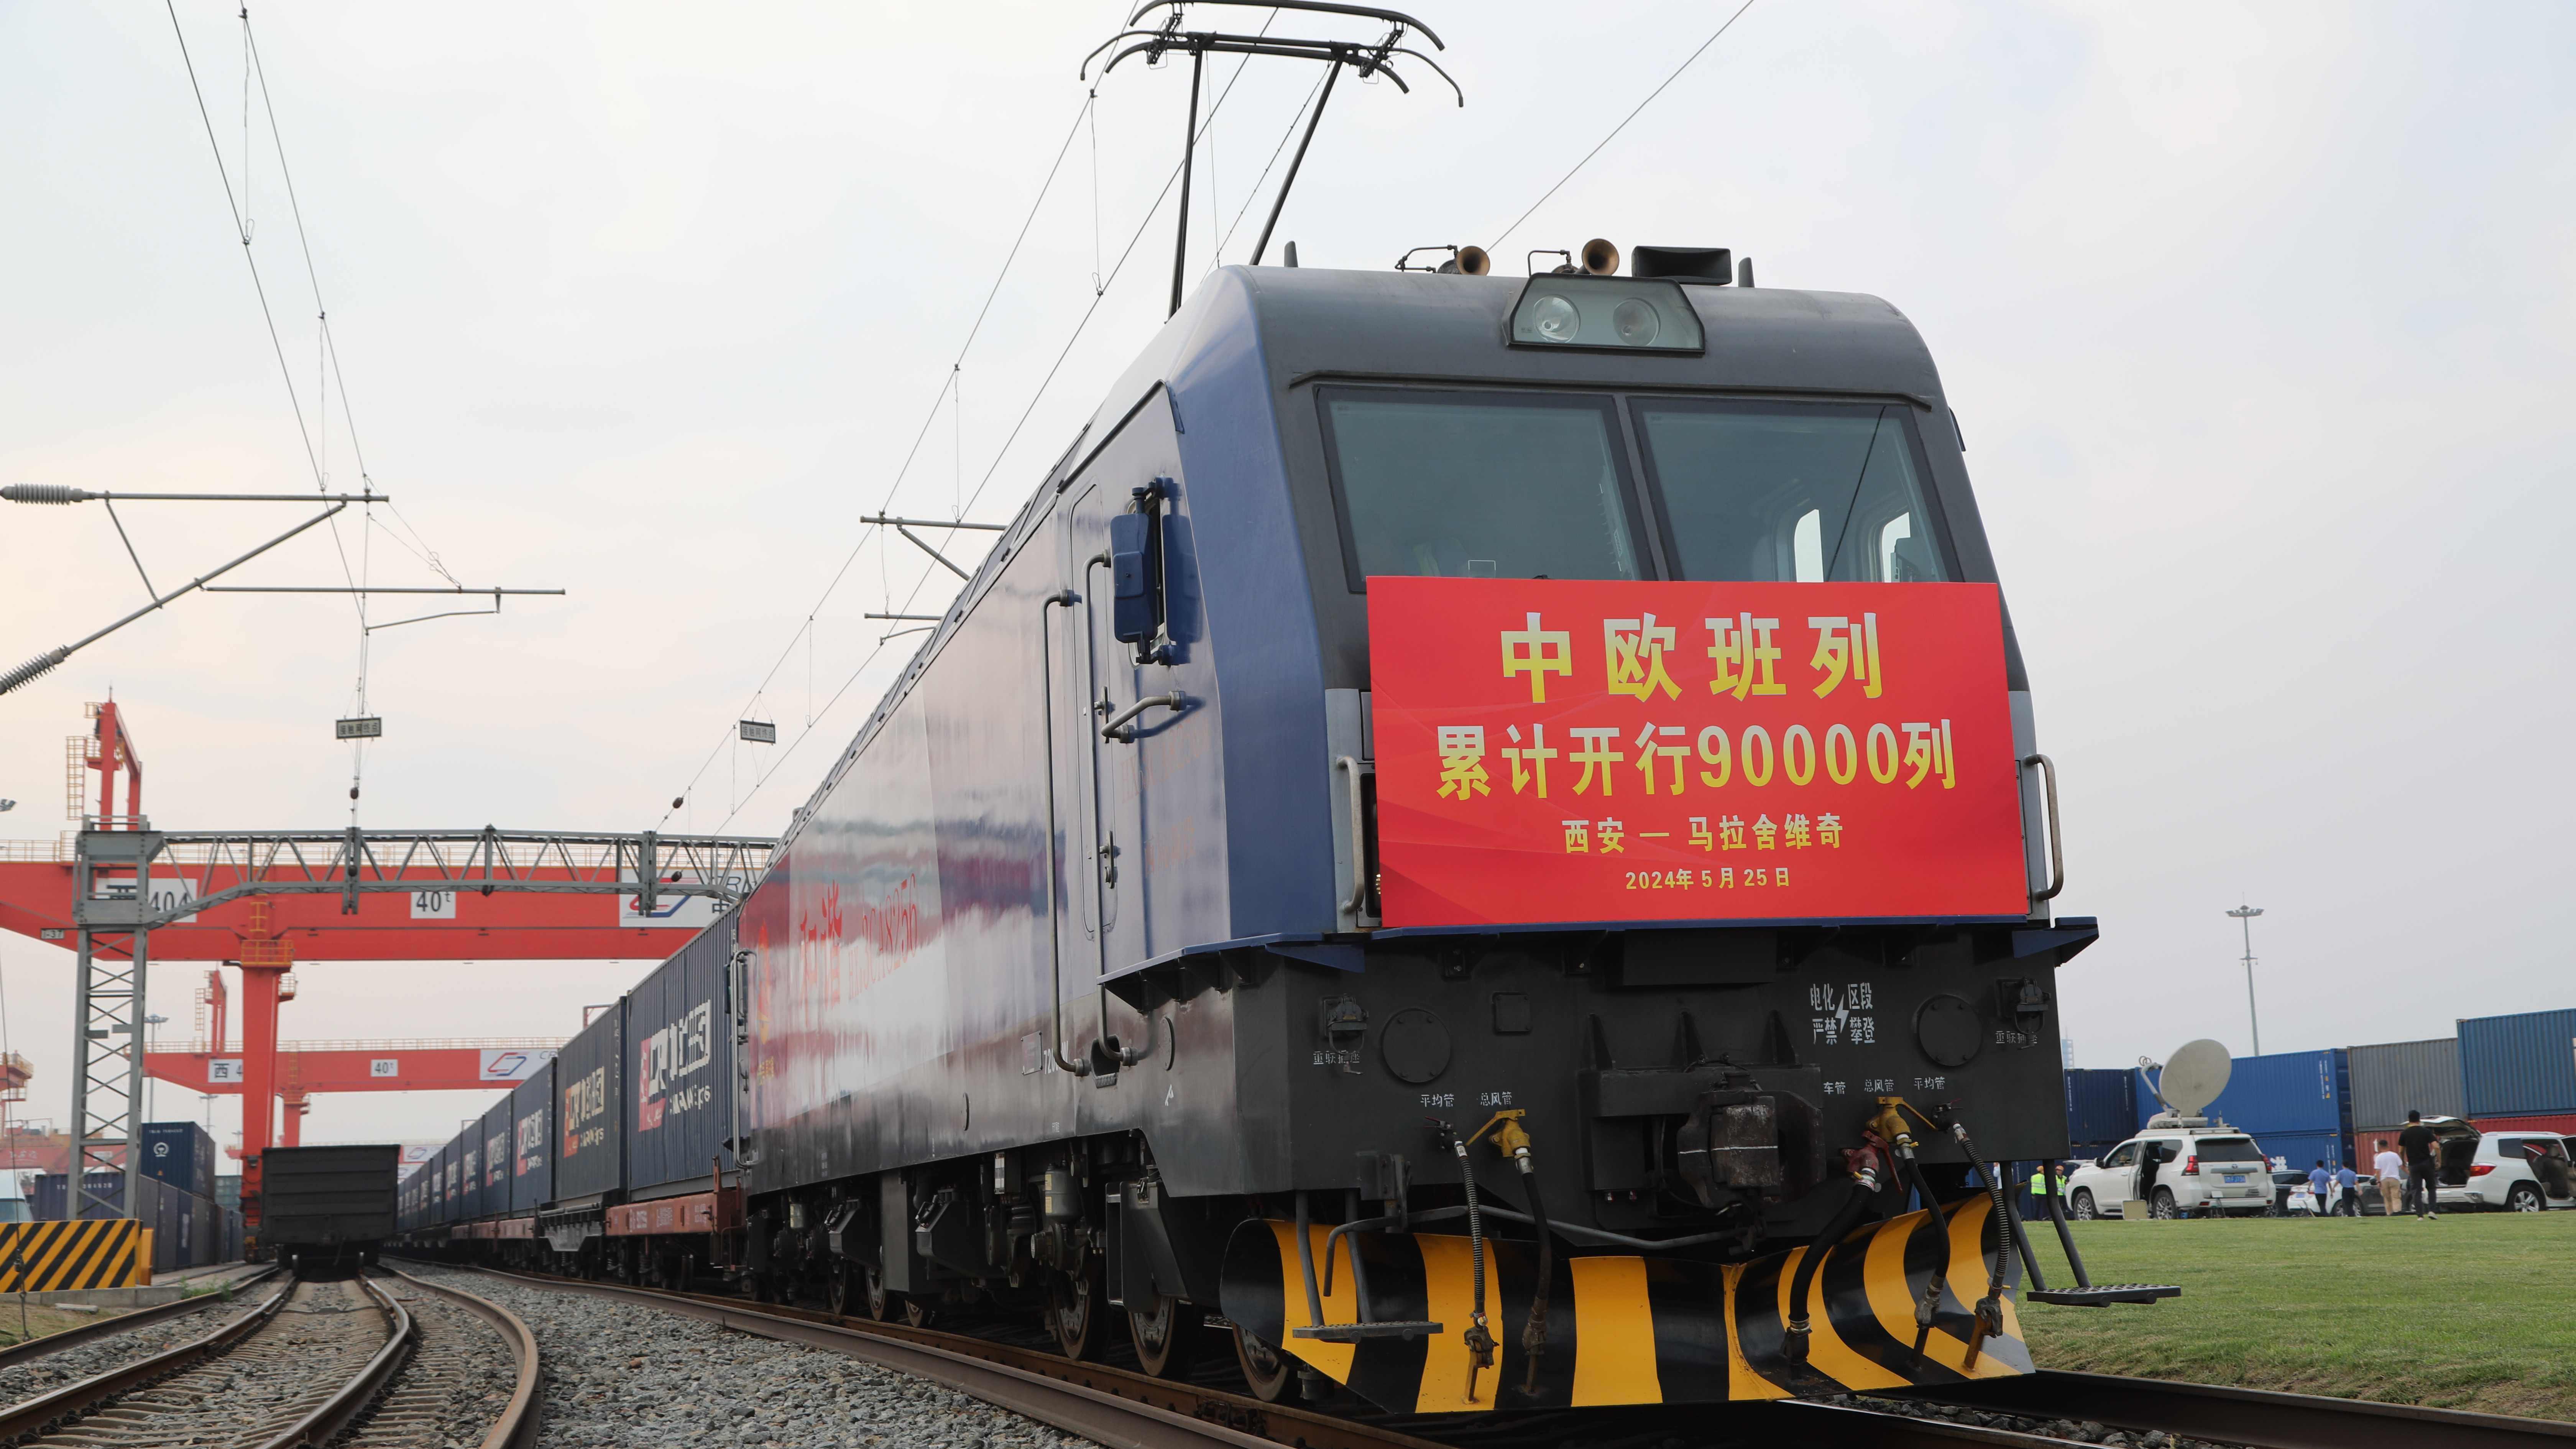 A train bound for Poland's Malaszewicze departs from Xi'an, the capital city of northwest China's Shaanxi Province, May 25, 2024. /China Media Group